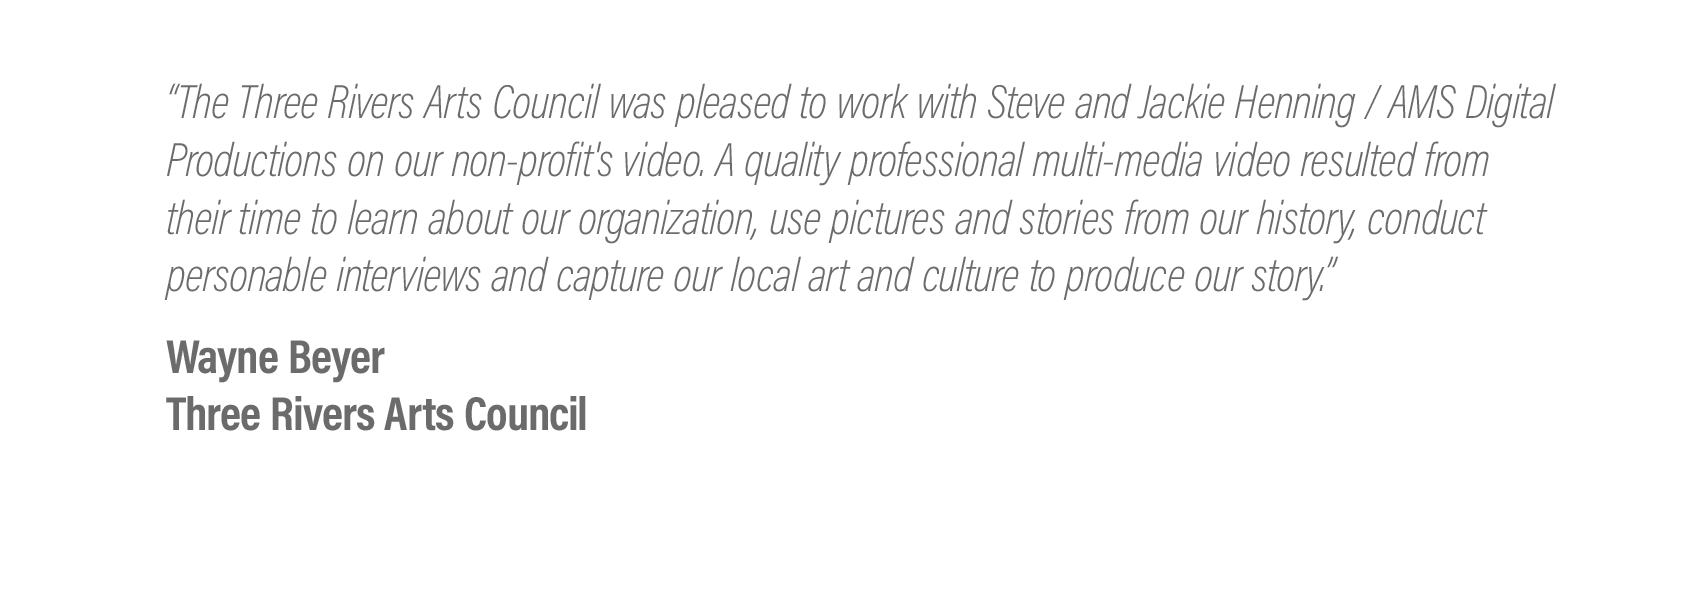  “The Three Rivers Arts Council was pleased to work with Steve and Jackie Henning / AMS Digital Productions on our non-profit's video.. A quality professional multi-media video resulted from their time to learn about our organization, use pictures an